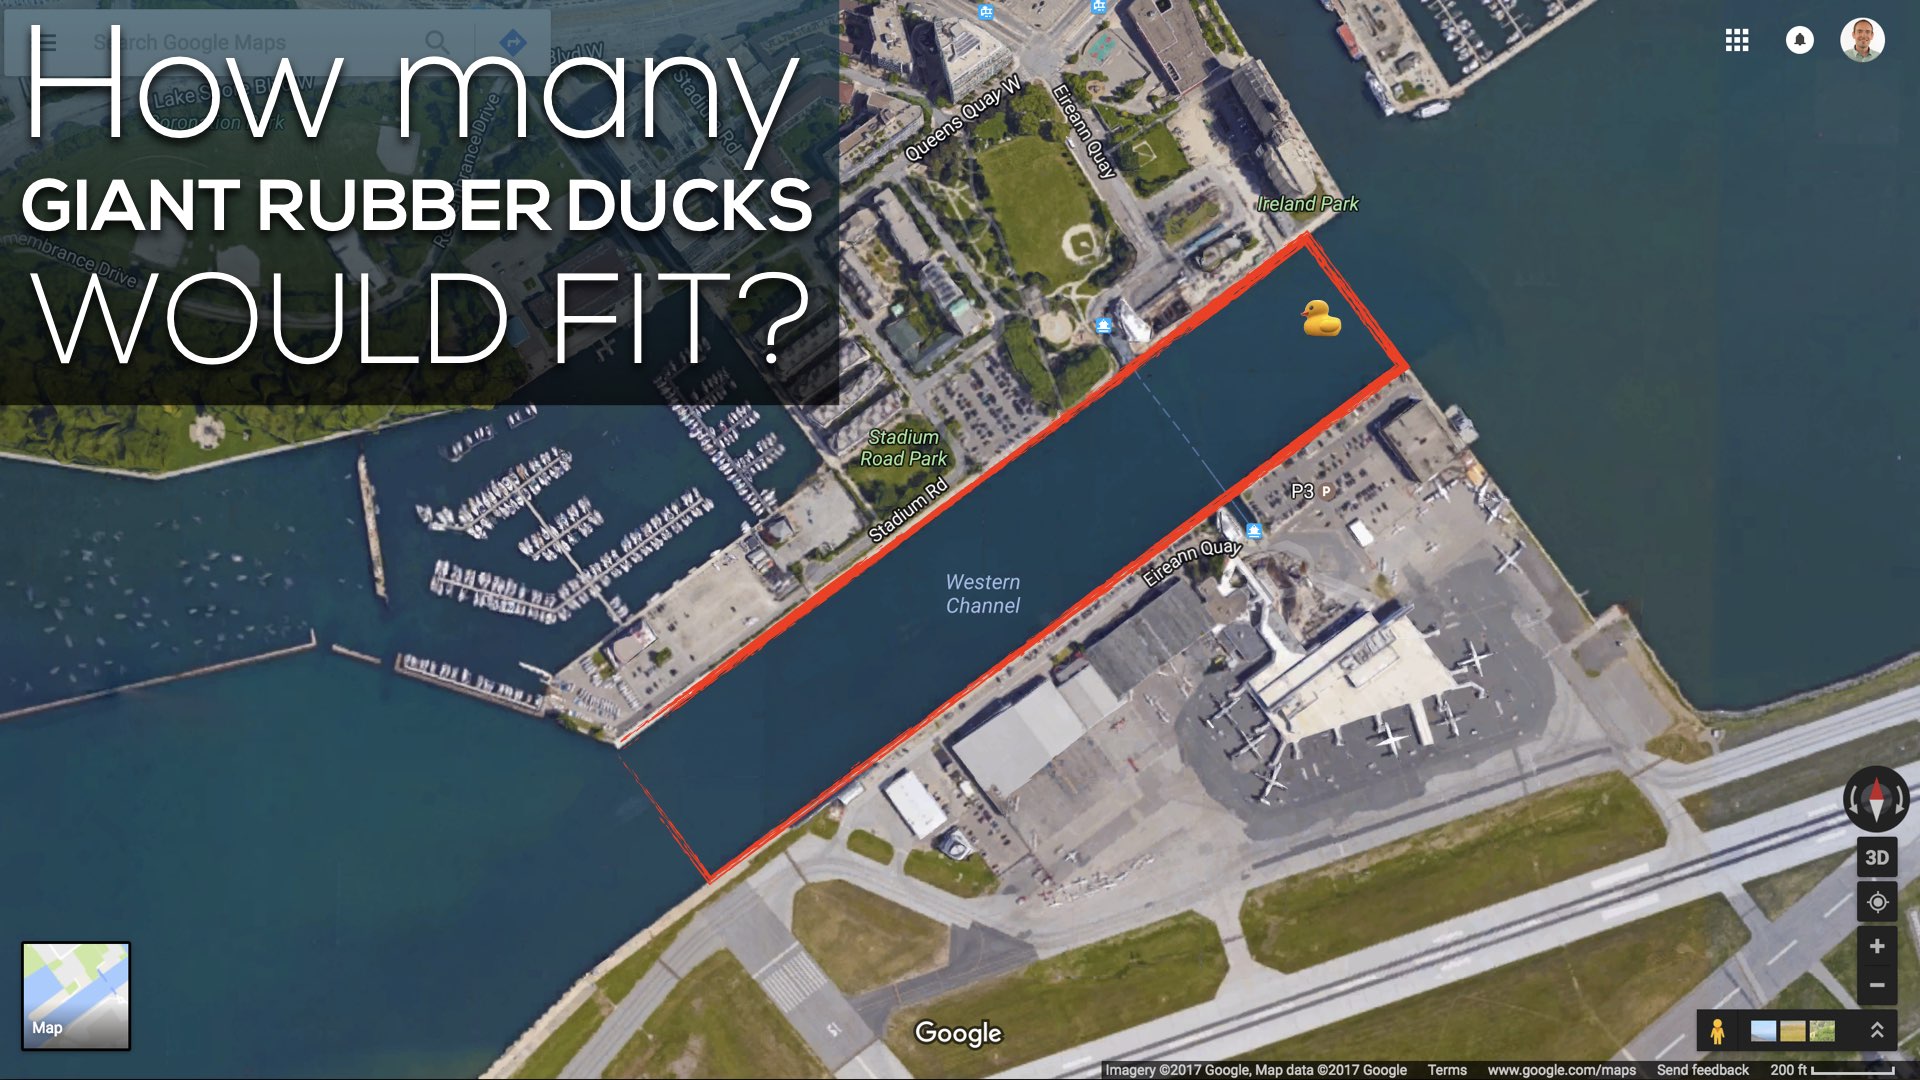 How many Giant Rubber Ducks Would Fit?